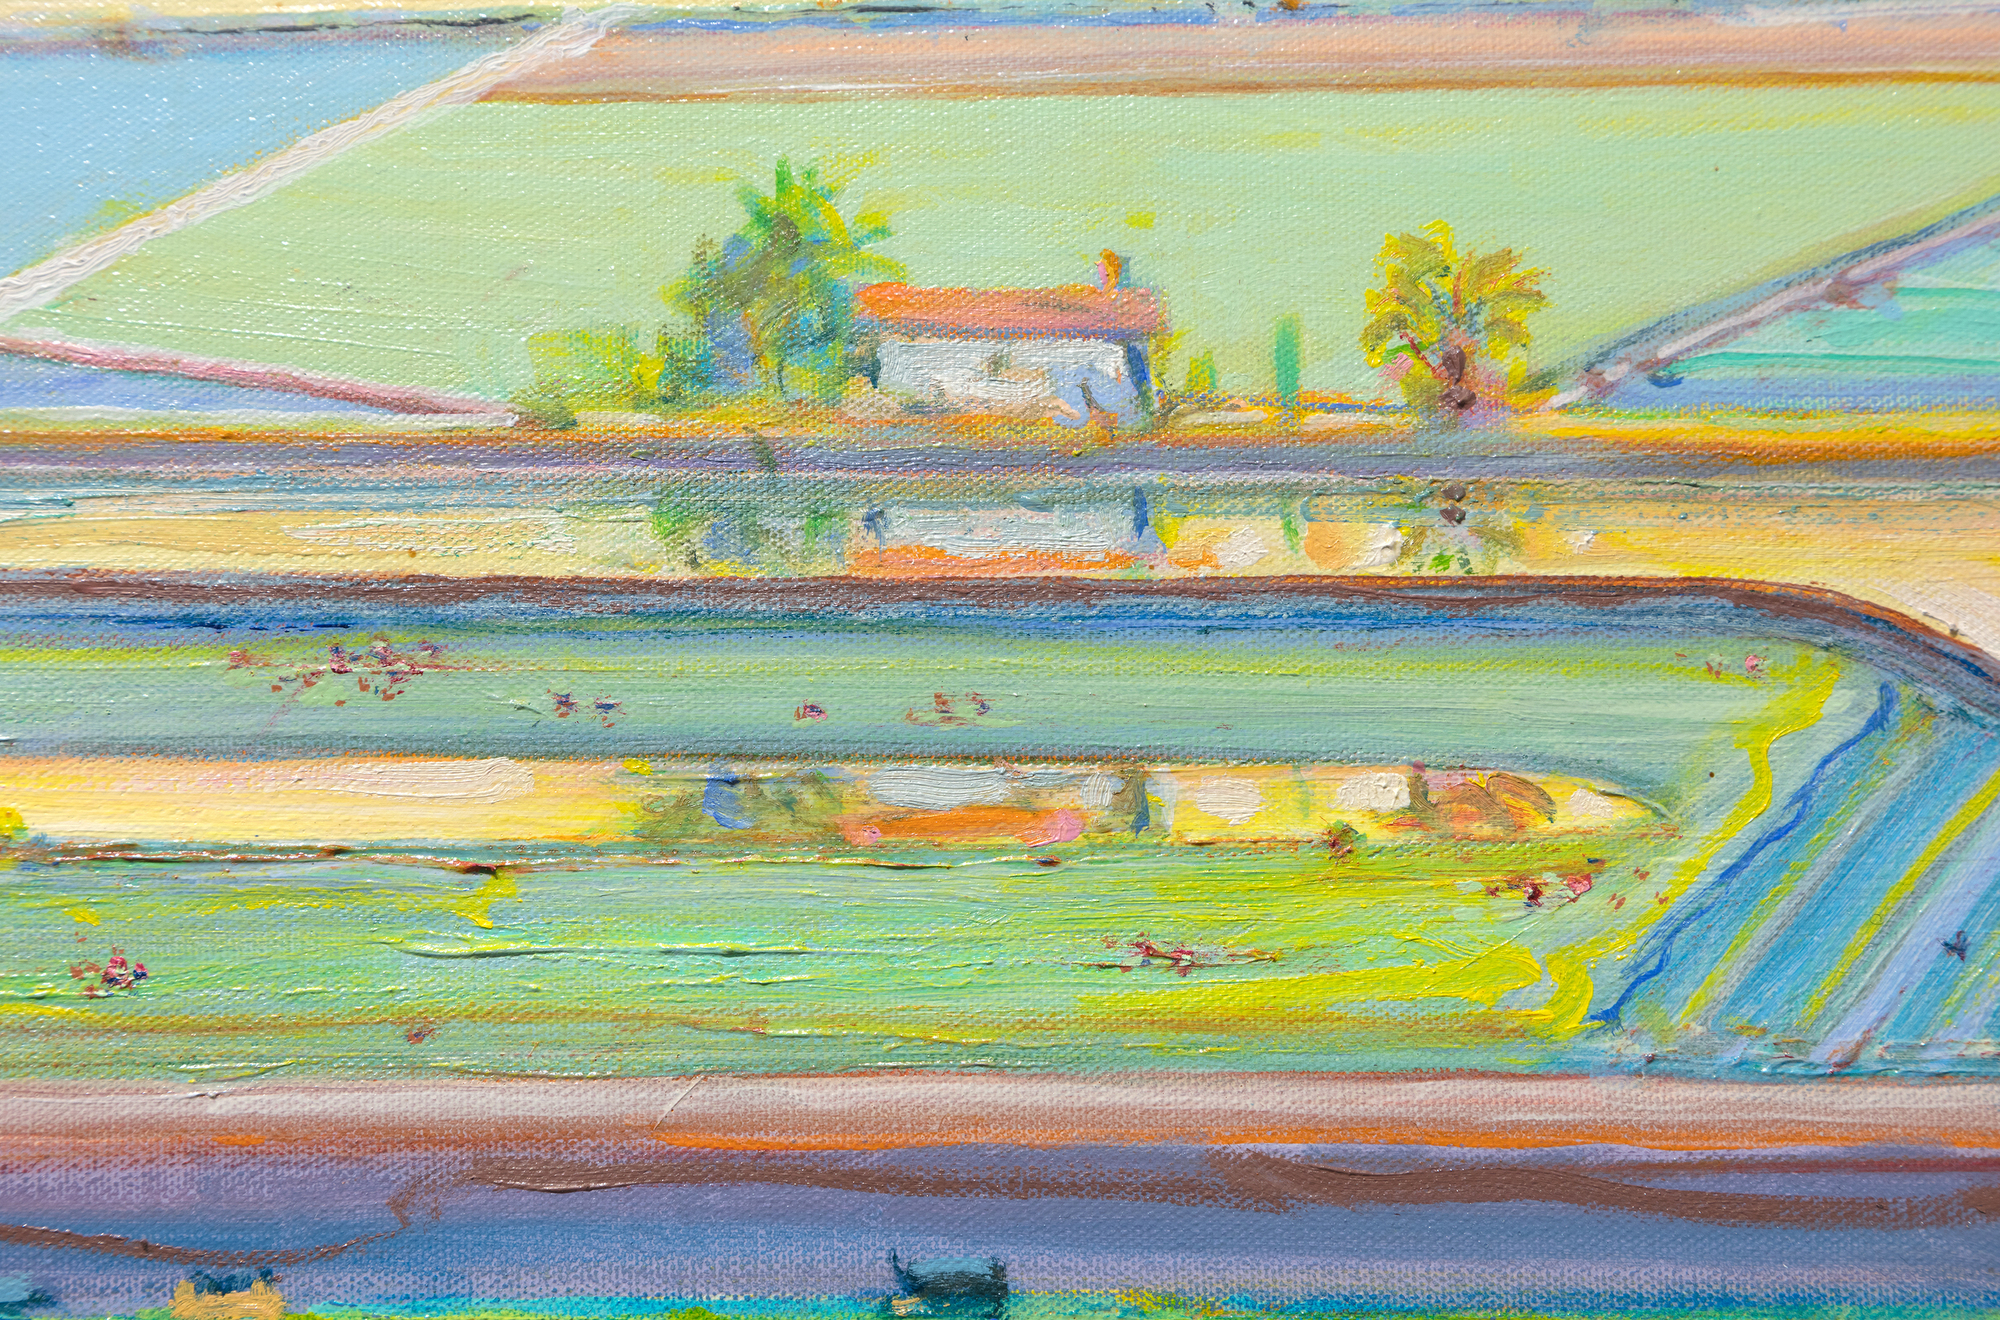 When forty rural Sacramento Delta landscapes by Wayne Thiebaud were unveiled at a San Francisco gallery opening in November 1997, attendees were amazed by paintings they never anticipated. This new frontier betrayed neither Thiebaud’s mastery of confectionary-shop colors nor his impeccable eye for formal relationships. Rather, his admirers were shocked to learn that all but seven of these forty interpretations had been completed in just two years. As his son Paul recalled, “the refinements of my father’s artistic process were ever changing in a chameleon-like frenzy.” The new direction had proved an exhilarating experience, each painting an affirmation of Wayne Thiebaud’s impassioned response to the fields and levees of the local environment he dearly loved. &lt;br&gt;&lt;br&gt;Viewed from the perspective of a bird or a plane, The Riverhouse is an agrarian tapestry conceived with a kaleidoscopic range of shapes and simple forms; fields striped with furrows or striated fans, deliriously colored parallelograms and trapezoids, an orchard garnished pizza-shaped wedge, and a boldly limned river, the lifeline of a thirsty California central valley largely dependent upon transported water.&lt;br&gt;&lt;br&gt;The Riverhouse is a painting that ‘moves’ between seamlessly shifting planes of aerial mapping that recalls Richard Diebenkorn’s stroke of insight when he took his first commercial flight the spring of 1951, and those partitions engaging a more standard vanishing point perspective. Thiebaud explained his process as “orchestrating with as much variety and tempo as I can.” Brightly lit with a fauve-like intensity, The Riverhouse is a heady concoction of vibrant pigment and rich impasto; one that recalls his indebtedness to Pierre Bonnard whose color Thiebaud referred to as “a bucket full of hot coals and ice cubes.” Among his many other influences, the insertion of objects — often tiny — that defy a rational sense of scale that reflects his interest in Chinese landscape painting.&lt;br&gt;&lt;br&gt;As always, his mastery as a painter recalls his titular pies and cakes with their bewitching rainbow-like halos and side-by-side colors of equal intensity but differing in hues to create the vibratory effect of an aura, what Thiebaud explained “denotes an attempt to develop as much energy and light and visual power as you can.” Thiebaud’s Sacramento Delta landscapes are an integral and important part of his oeuvre. Paintings such as The Riverhouse rival the best abstract art of the twentieth century. His good friend, Willem de Kooning thought so, too.